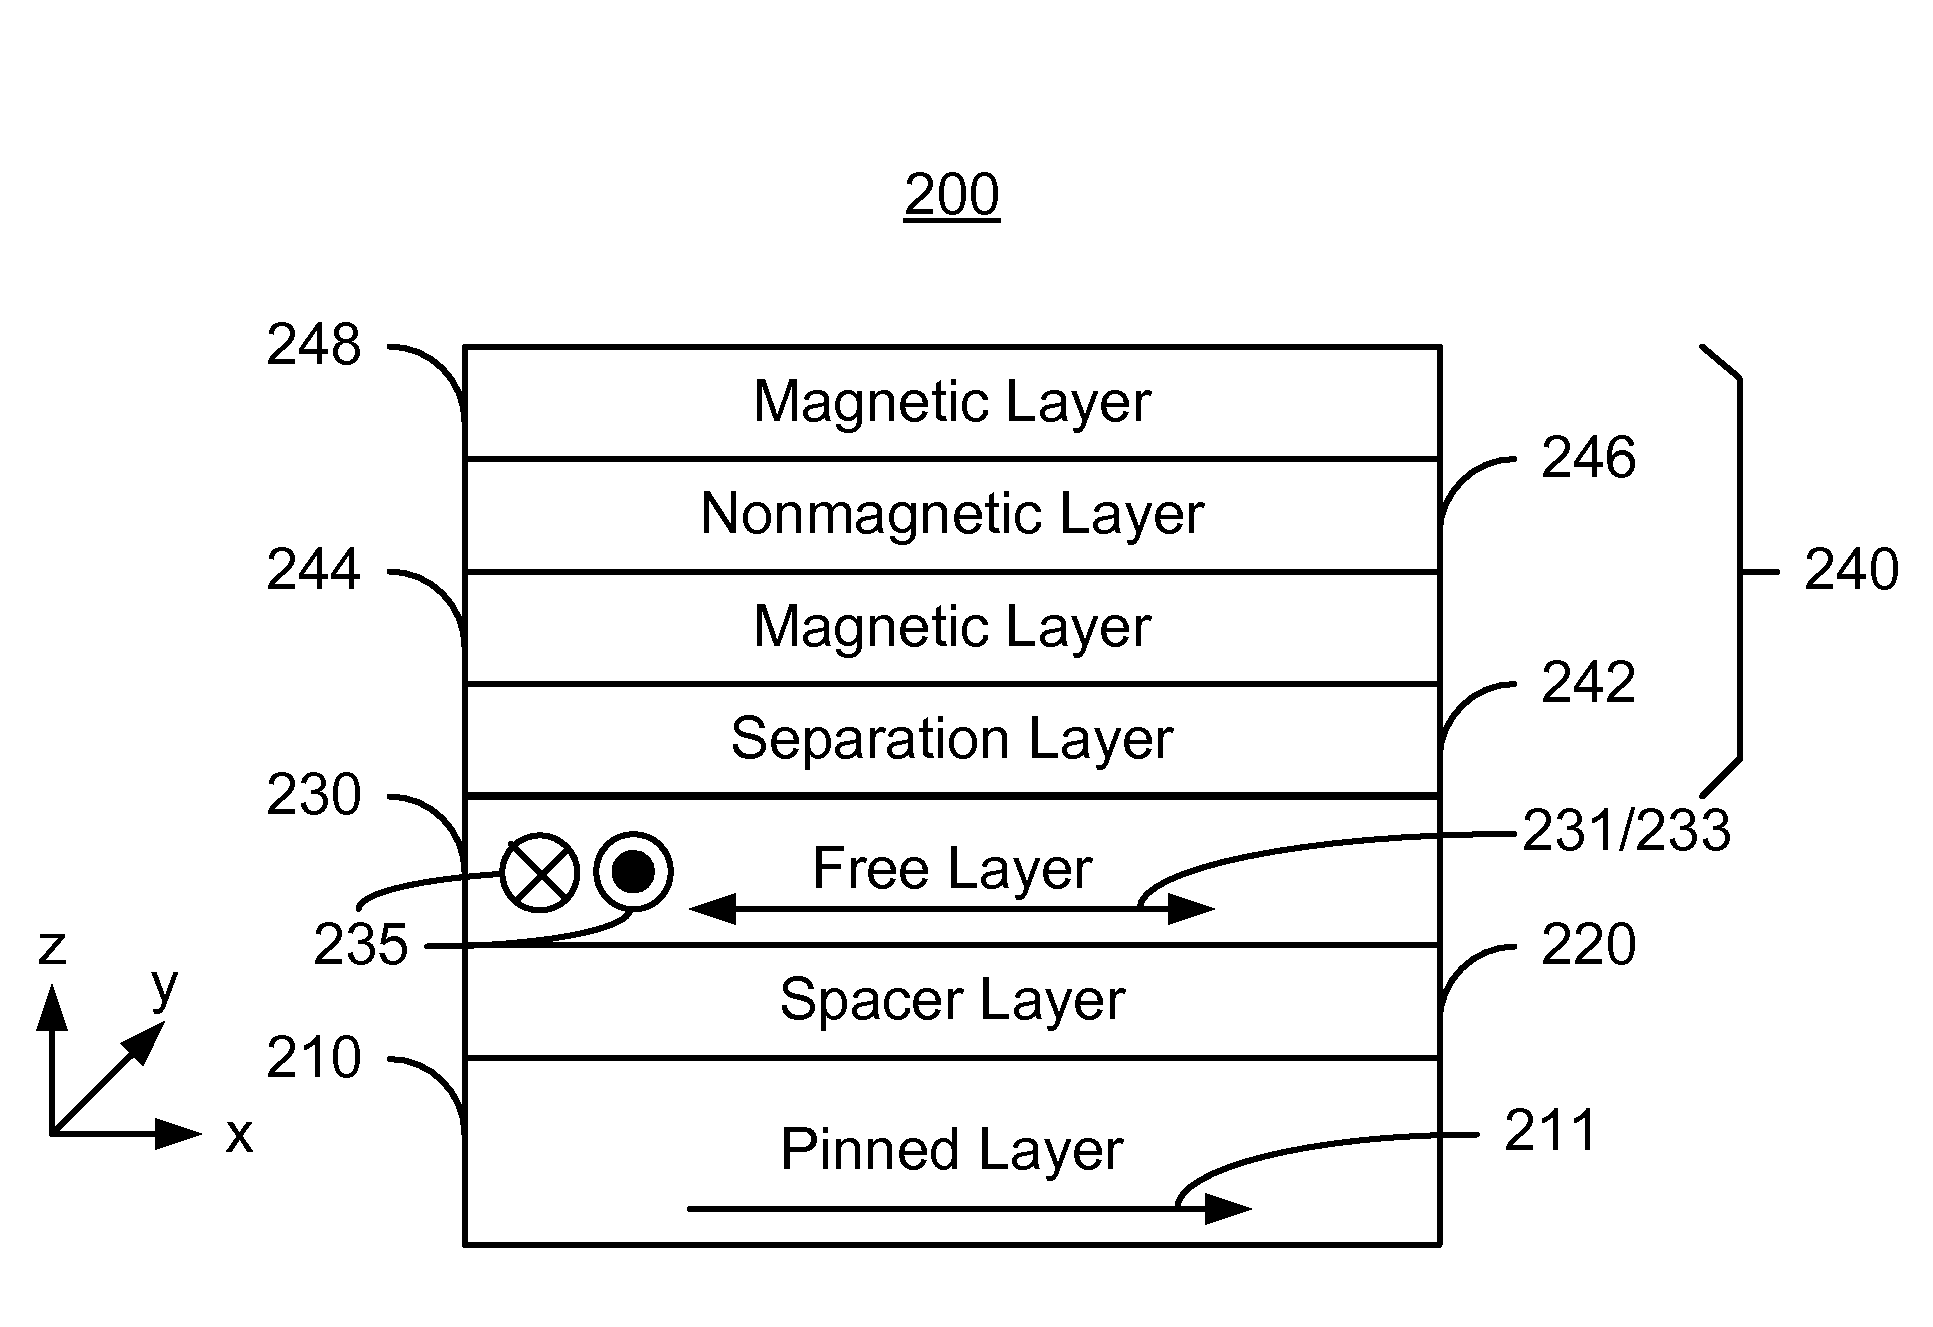 Method and system for providing magnetic elements having enhanced magnetic anisotropy and memories using such magnetic elements